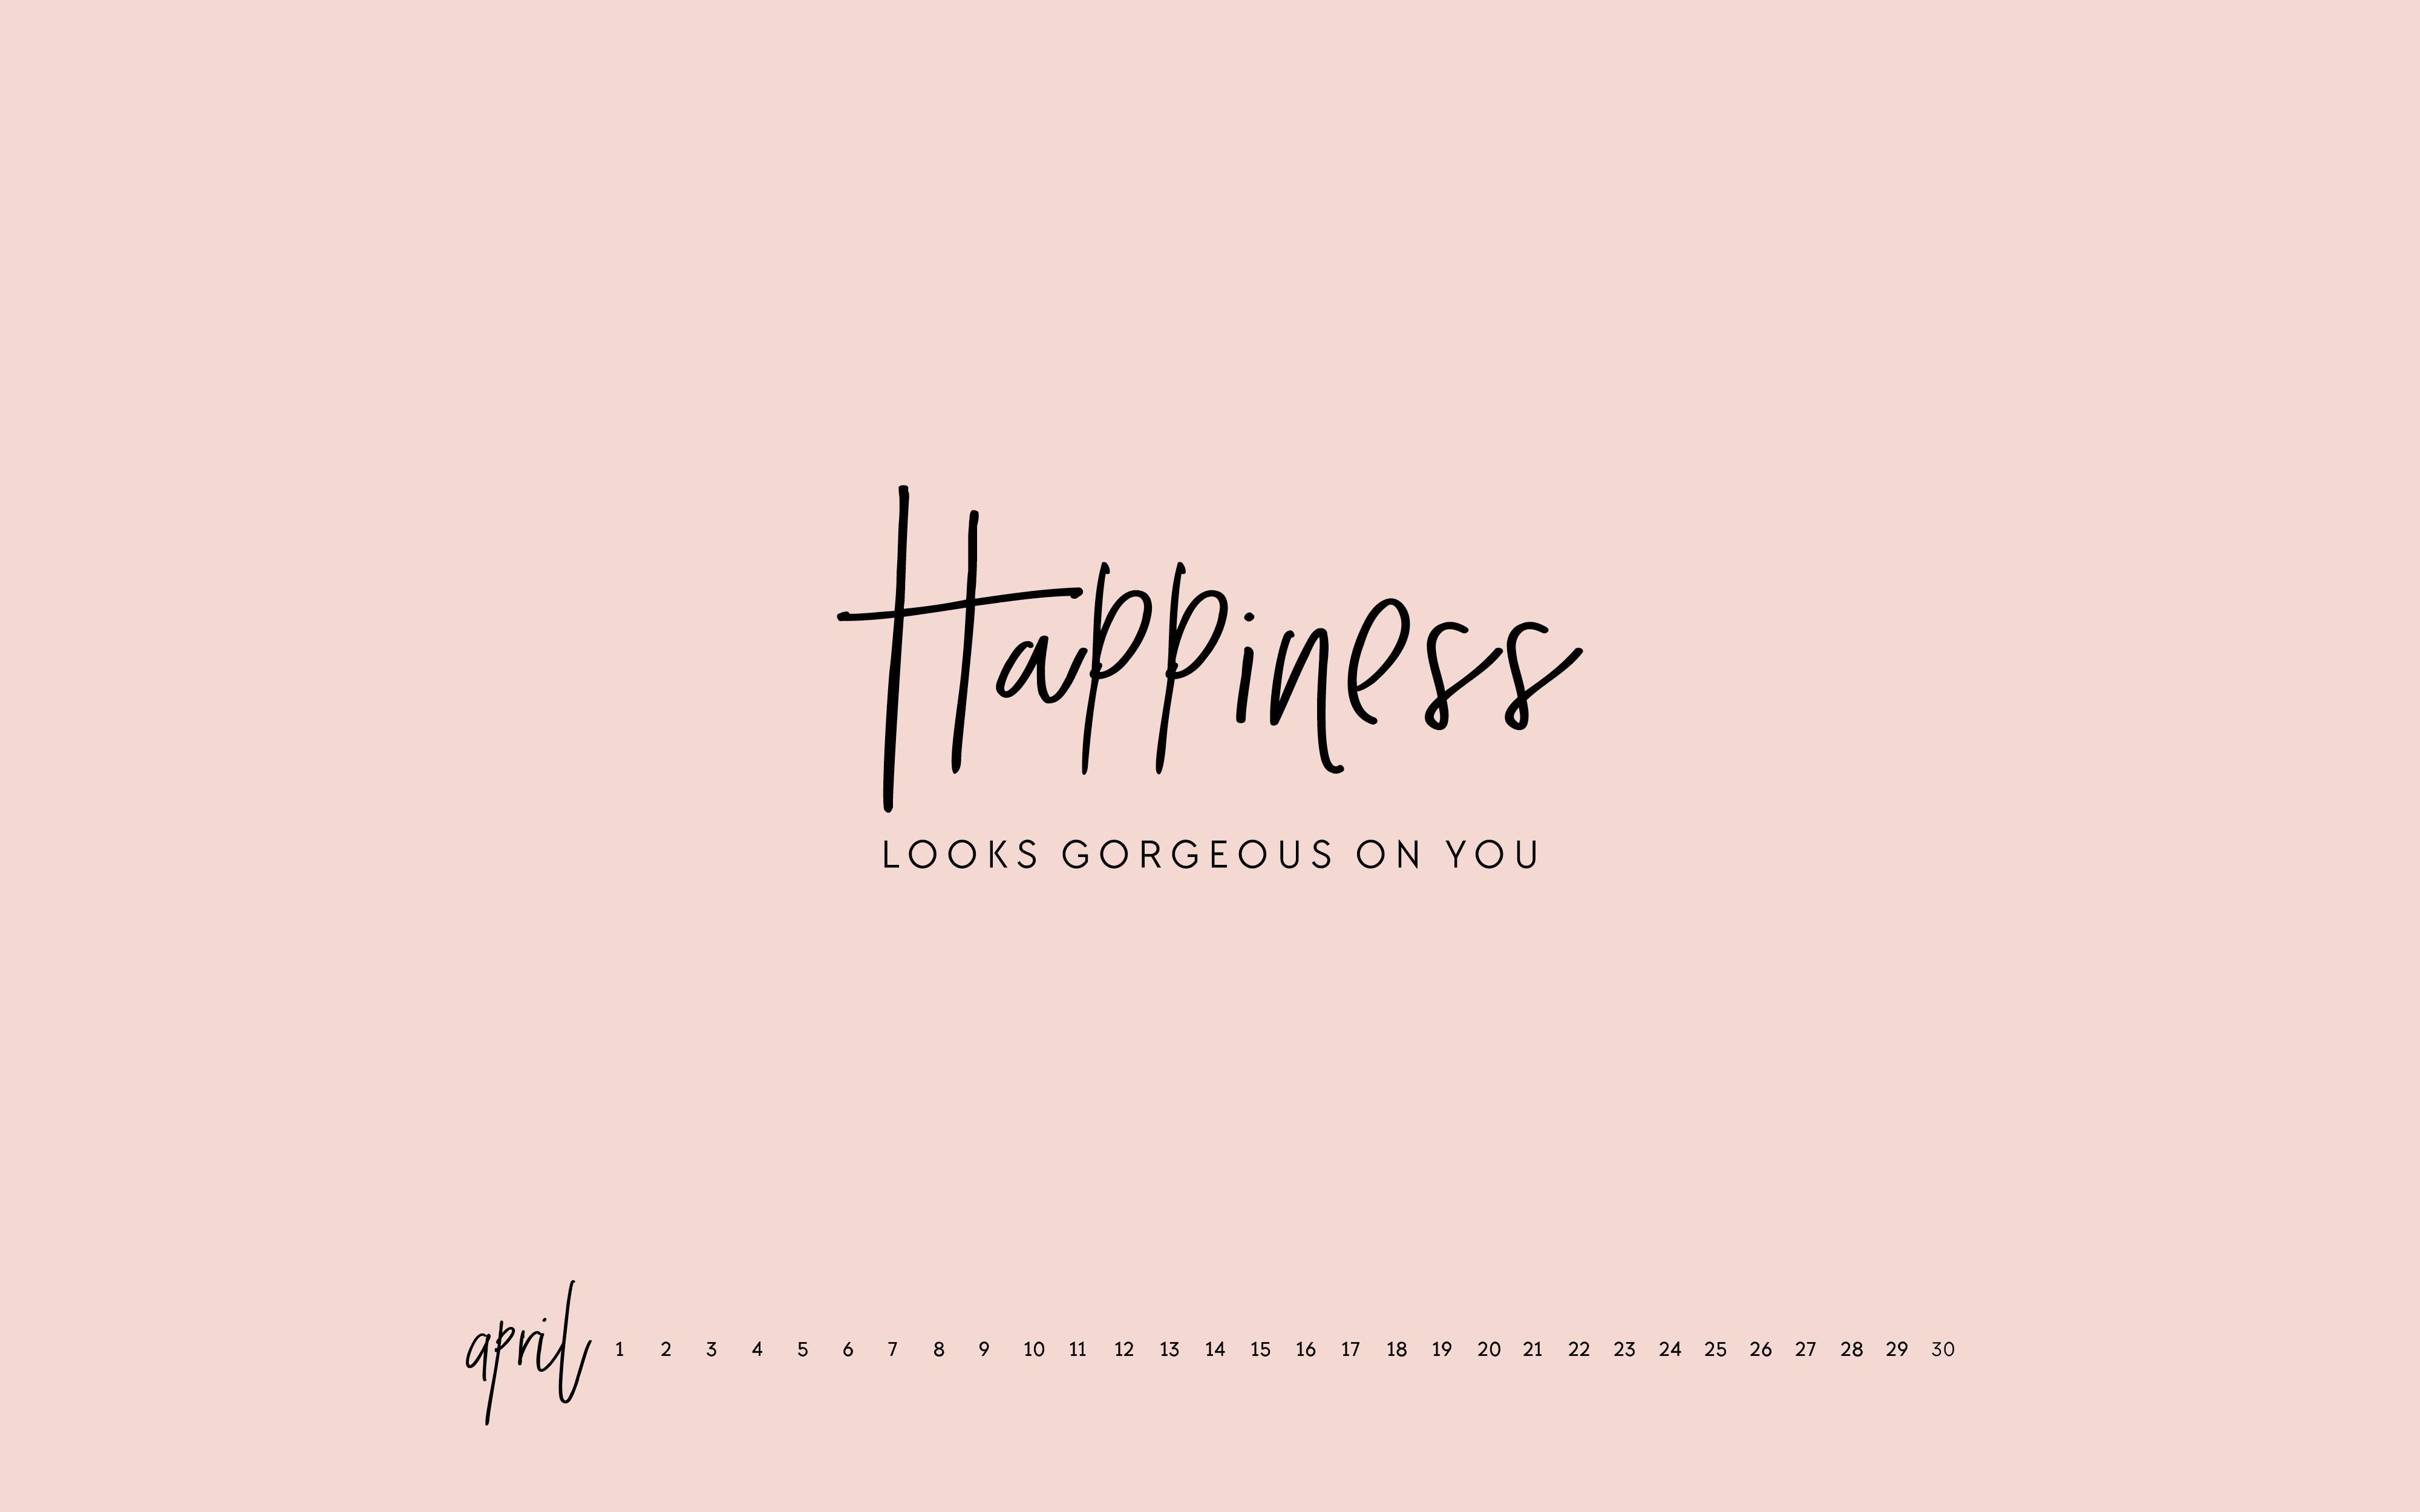 Happiness looks gorgeous on you - Calligraphy